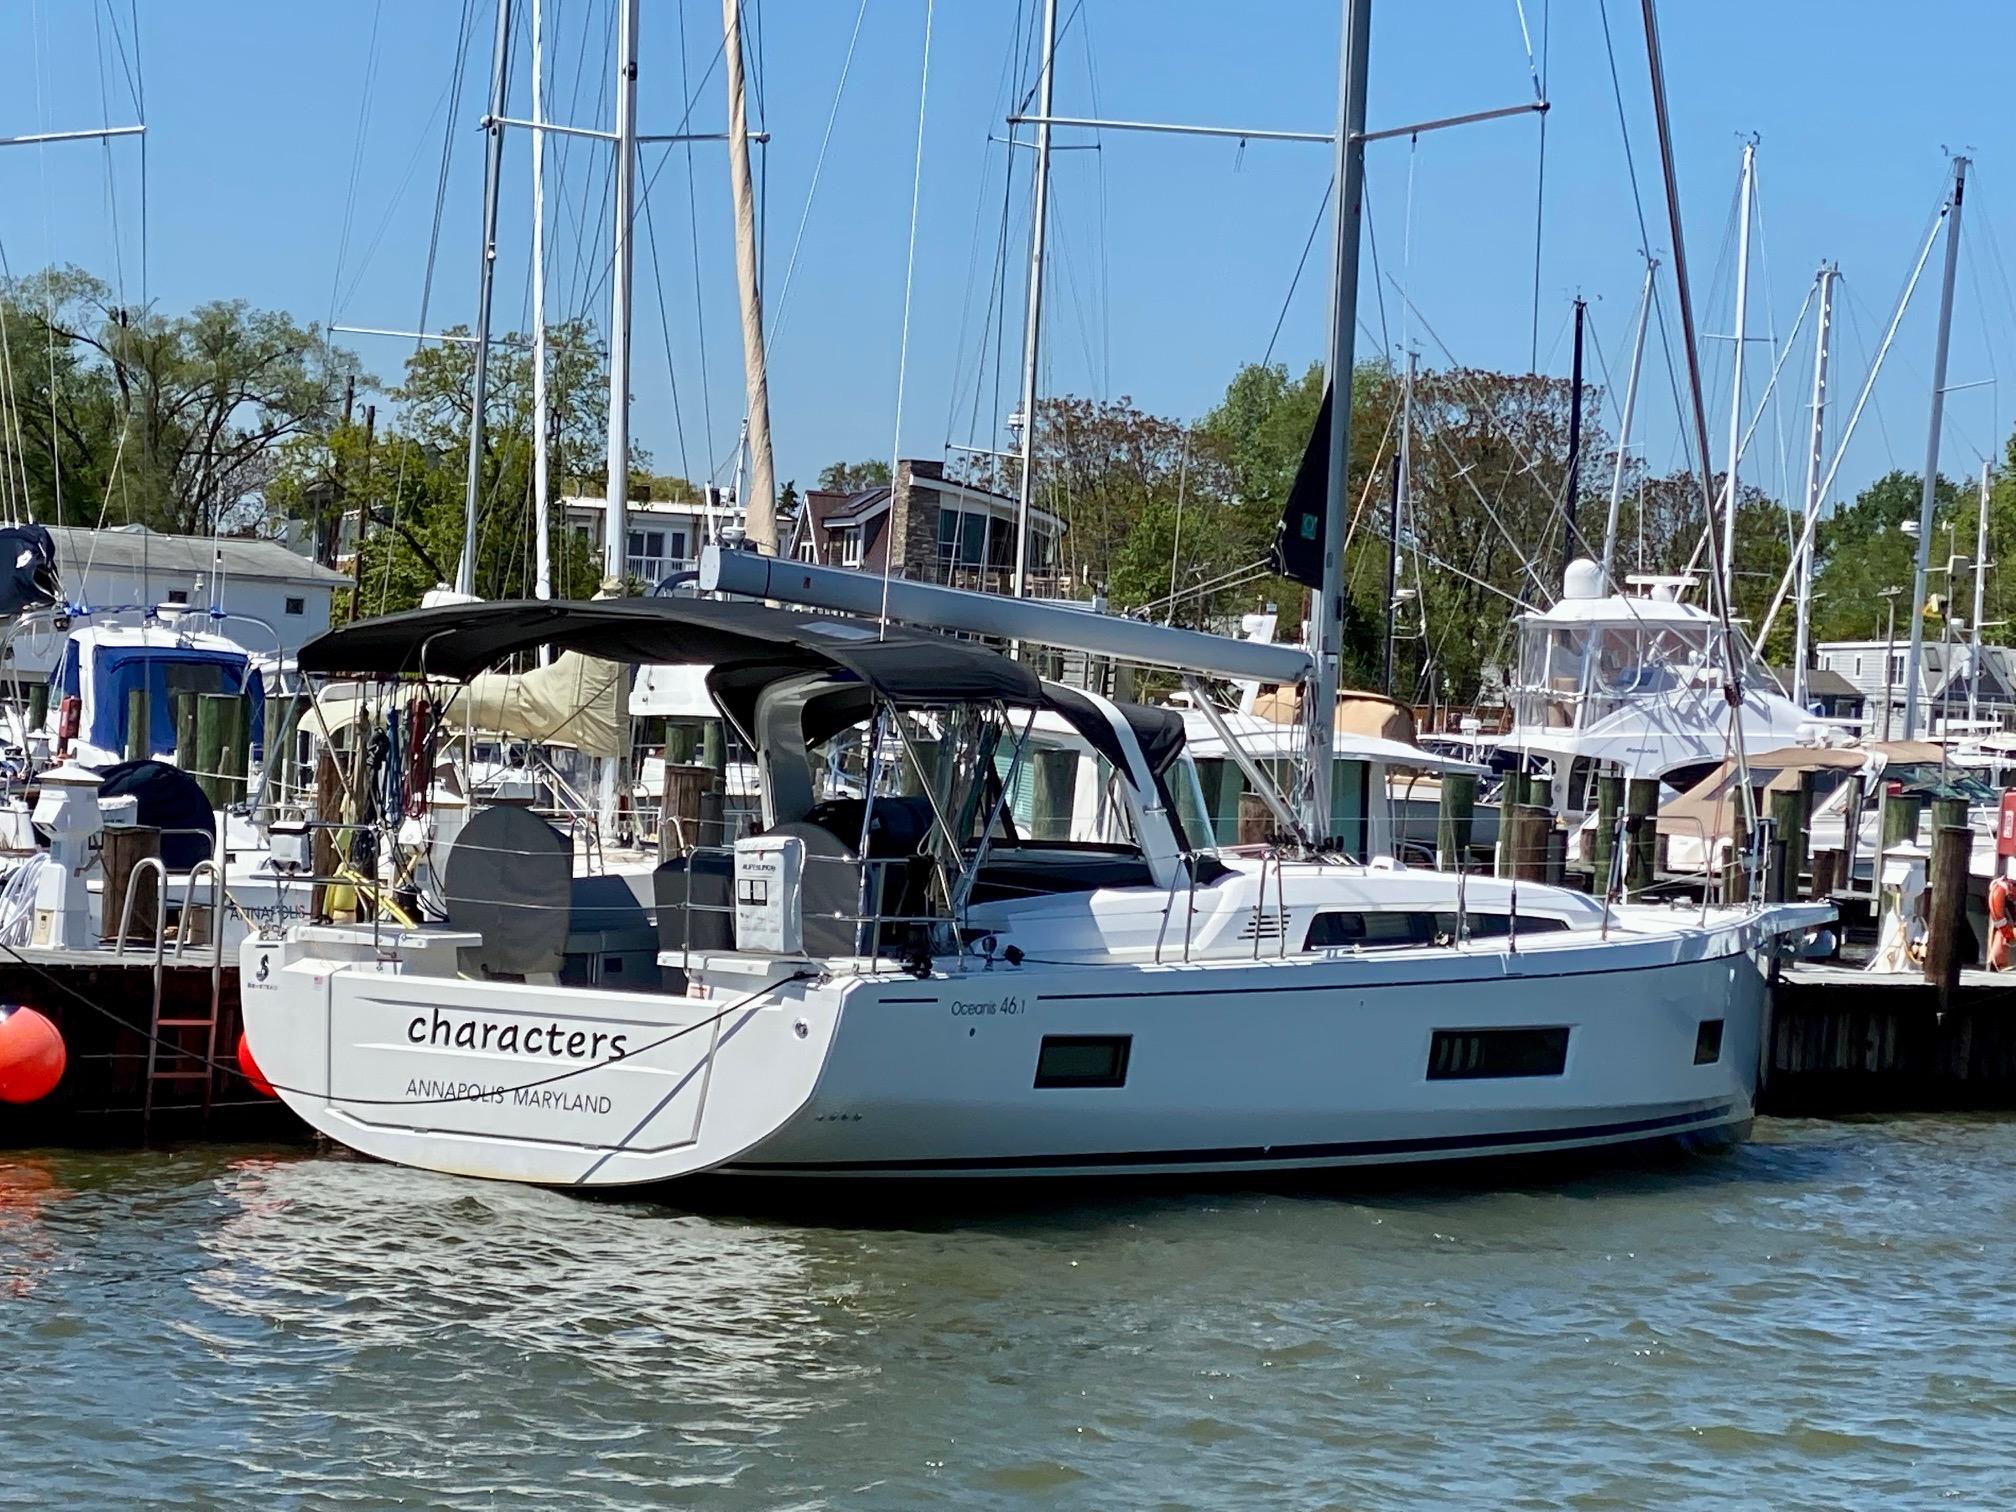 Characters Yacht Brokers Of Annapolis